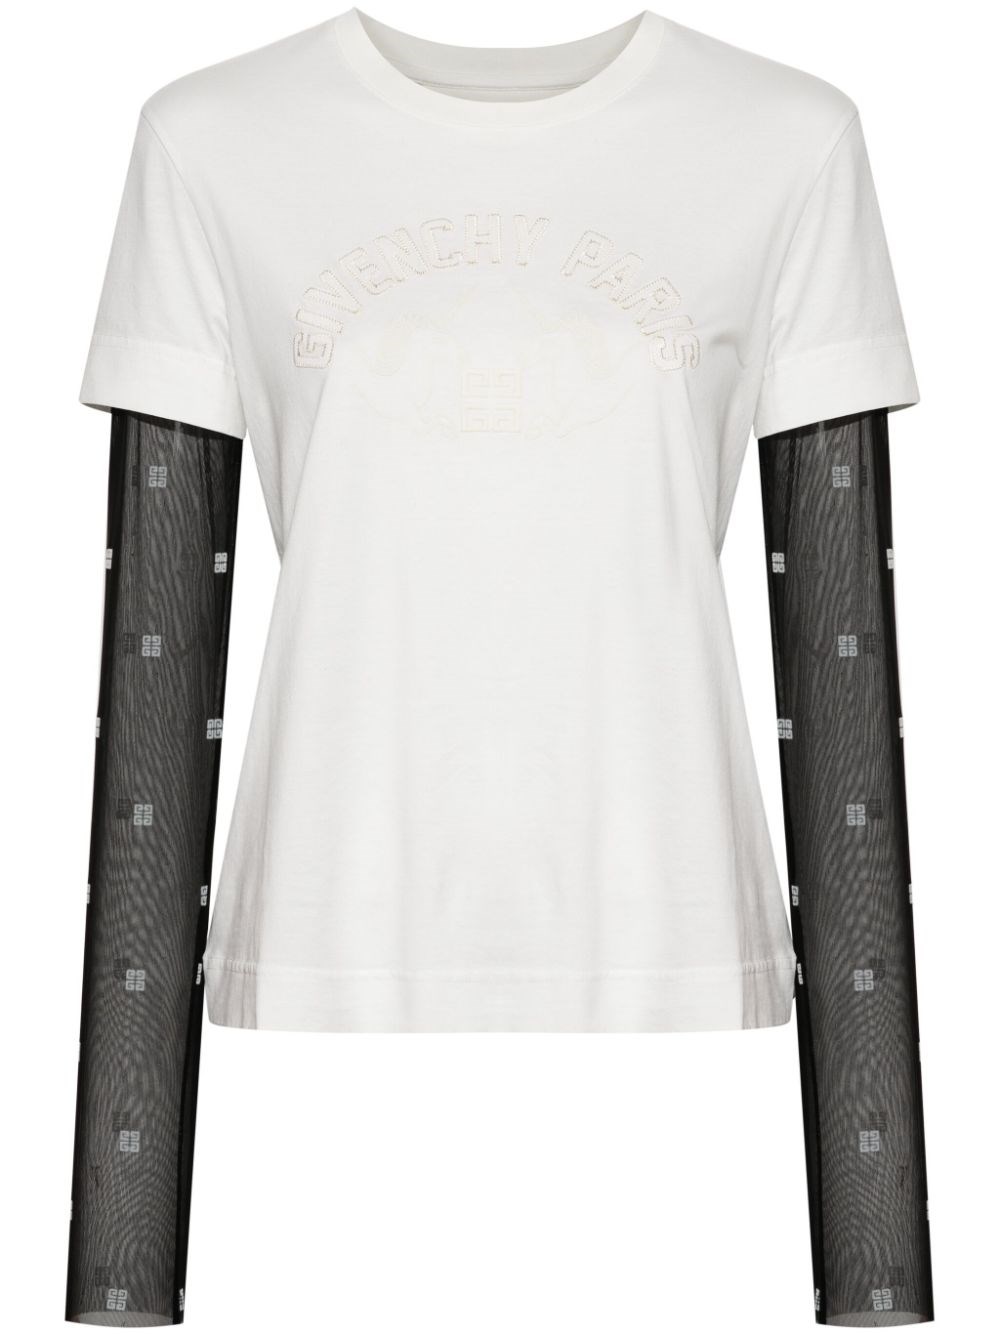 GIVENCHY T-SHIRT SOVRAPPOSTA SLIM IN COTONE E TULLE 4G